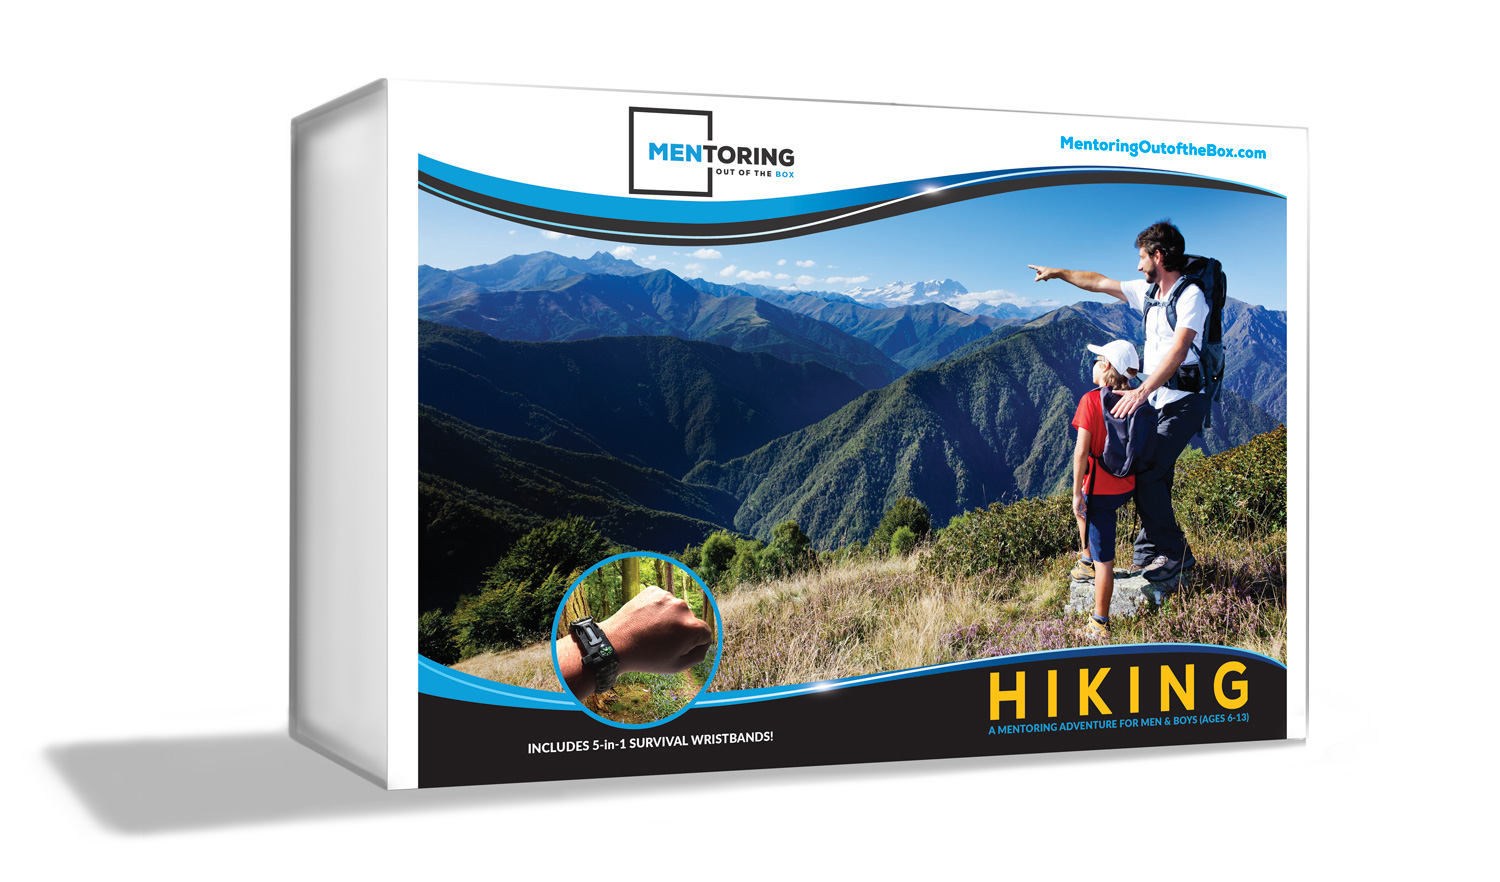 Mentoring Out of the Box - Hiking